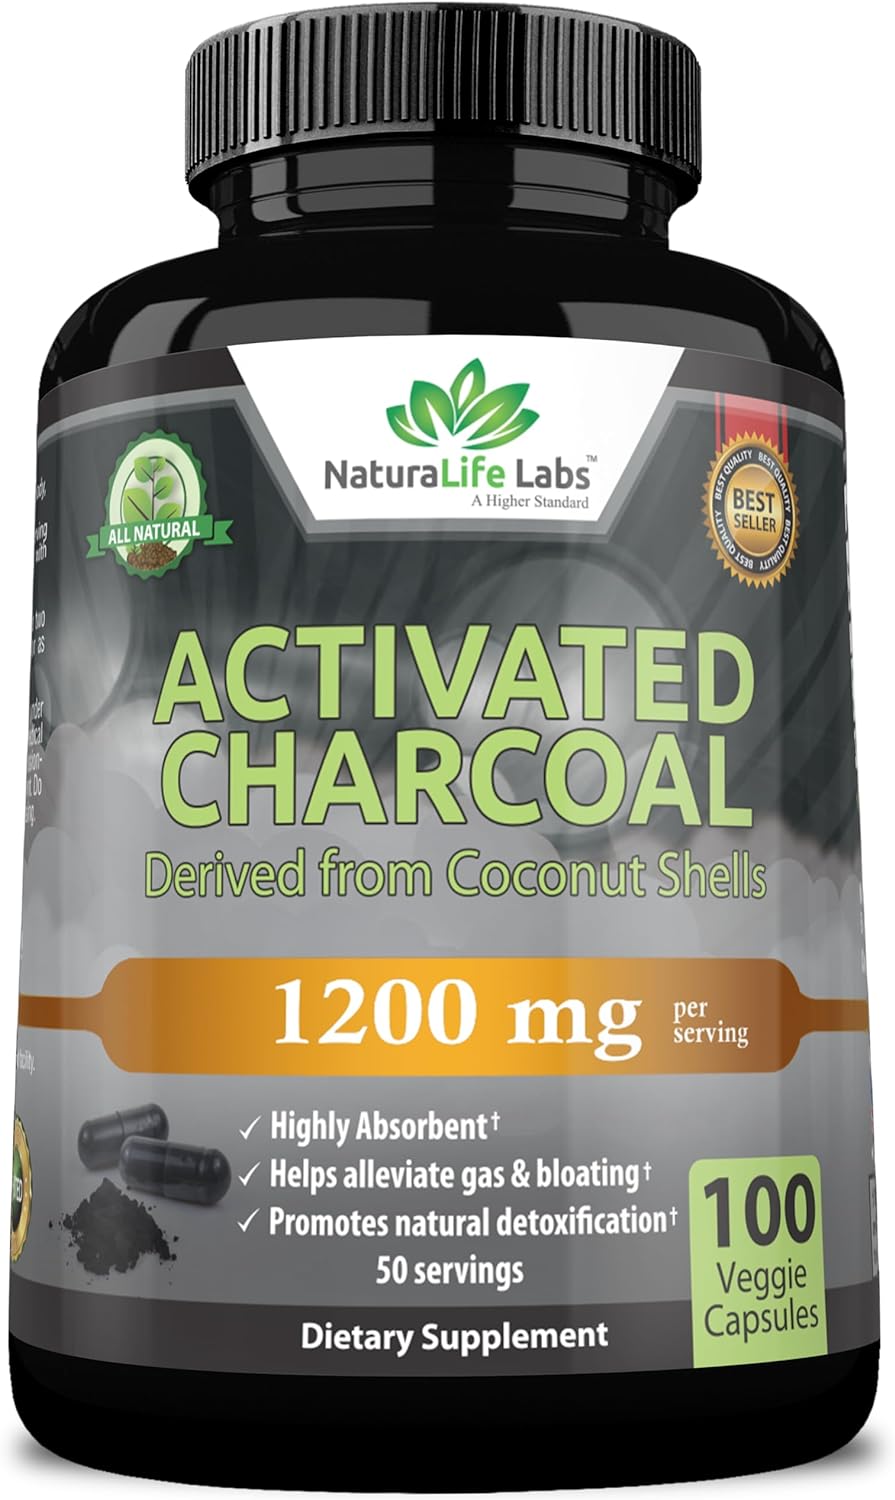 Activated Charcoal Capsules - 1,200 mg Highly Absorbent Helps Alleviate Gas & Bloating Promotes 